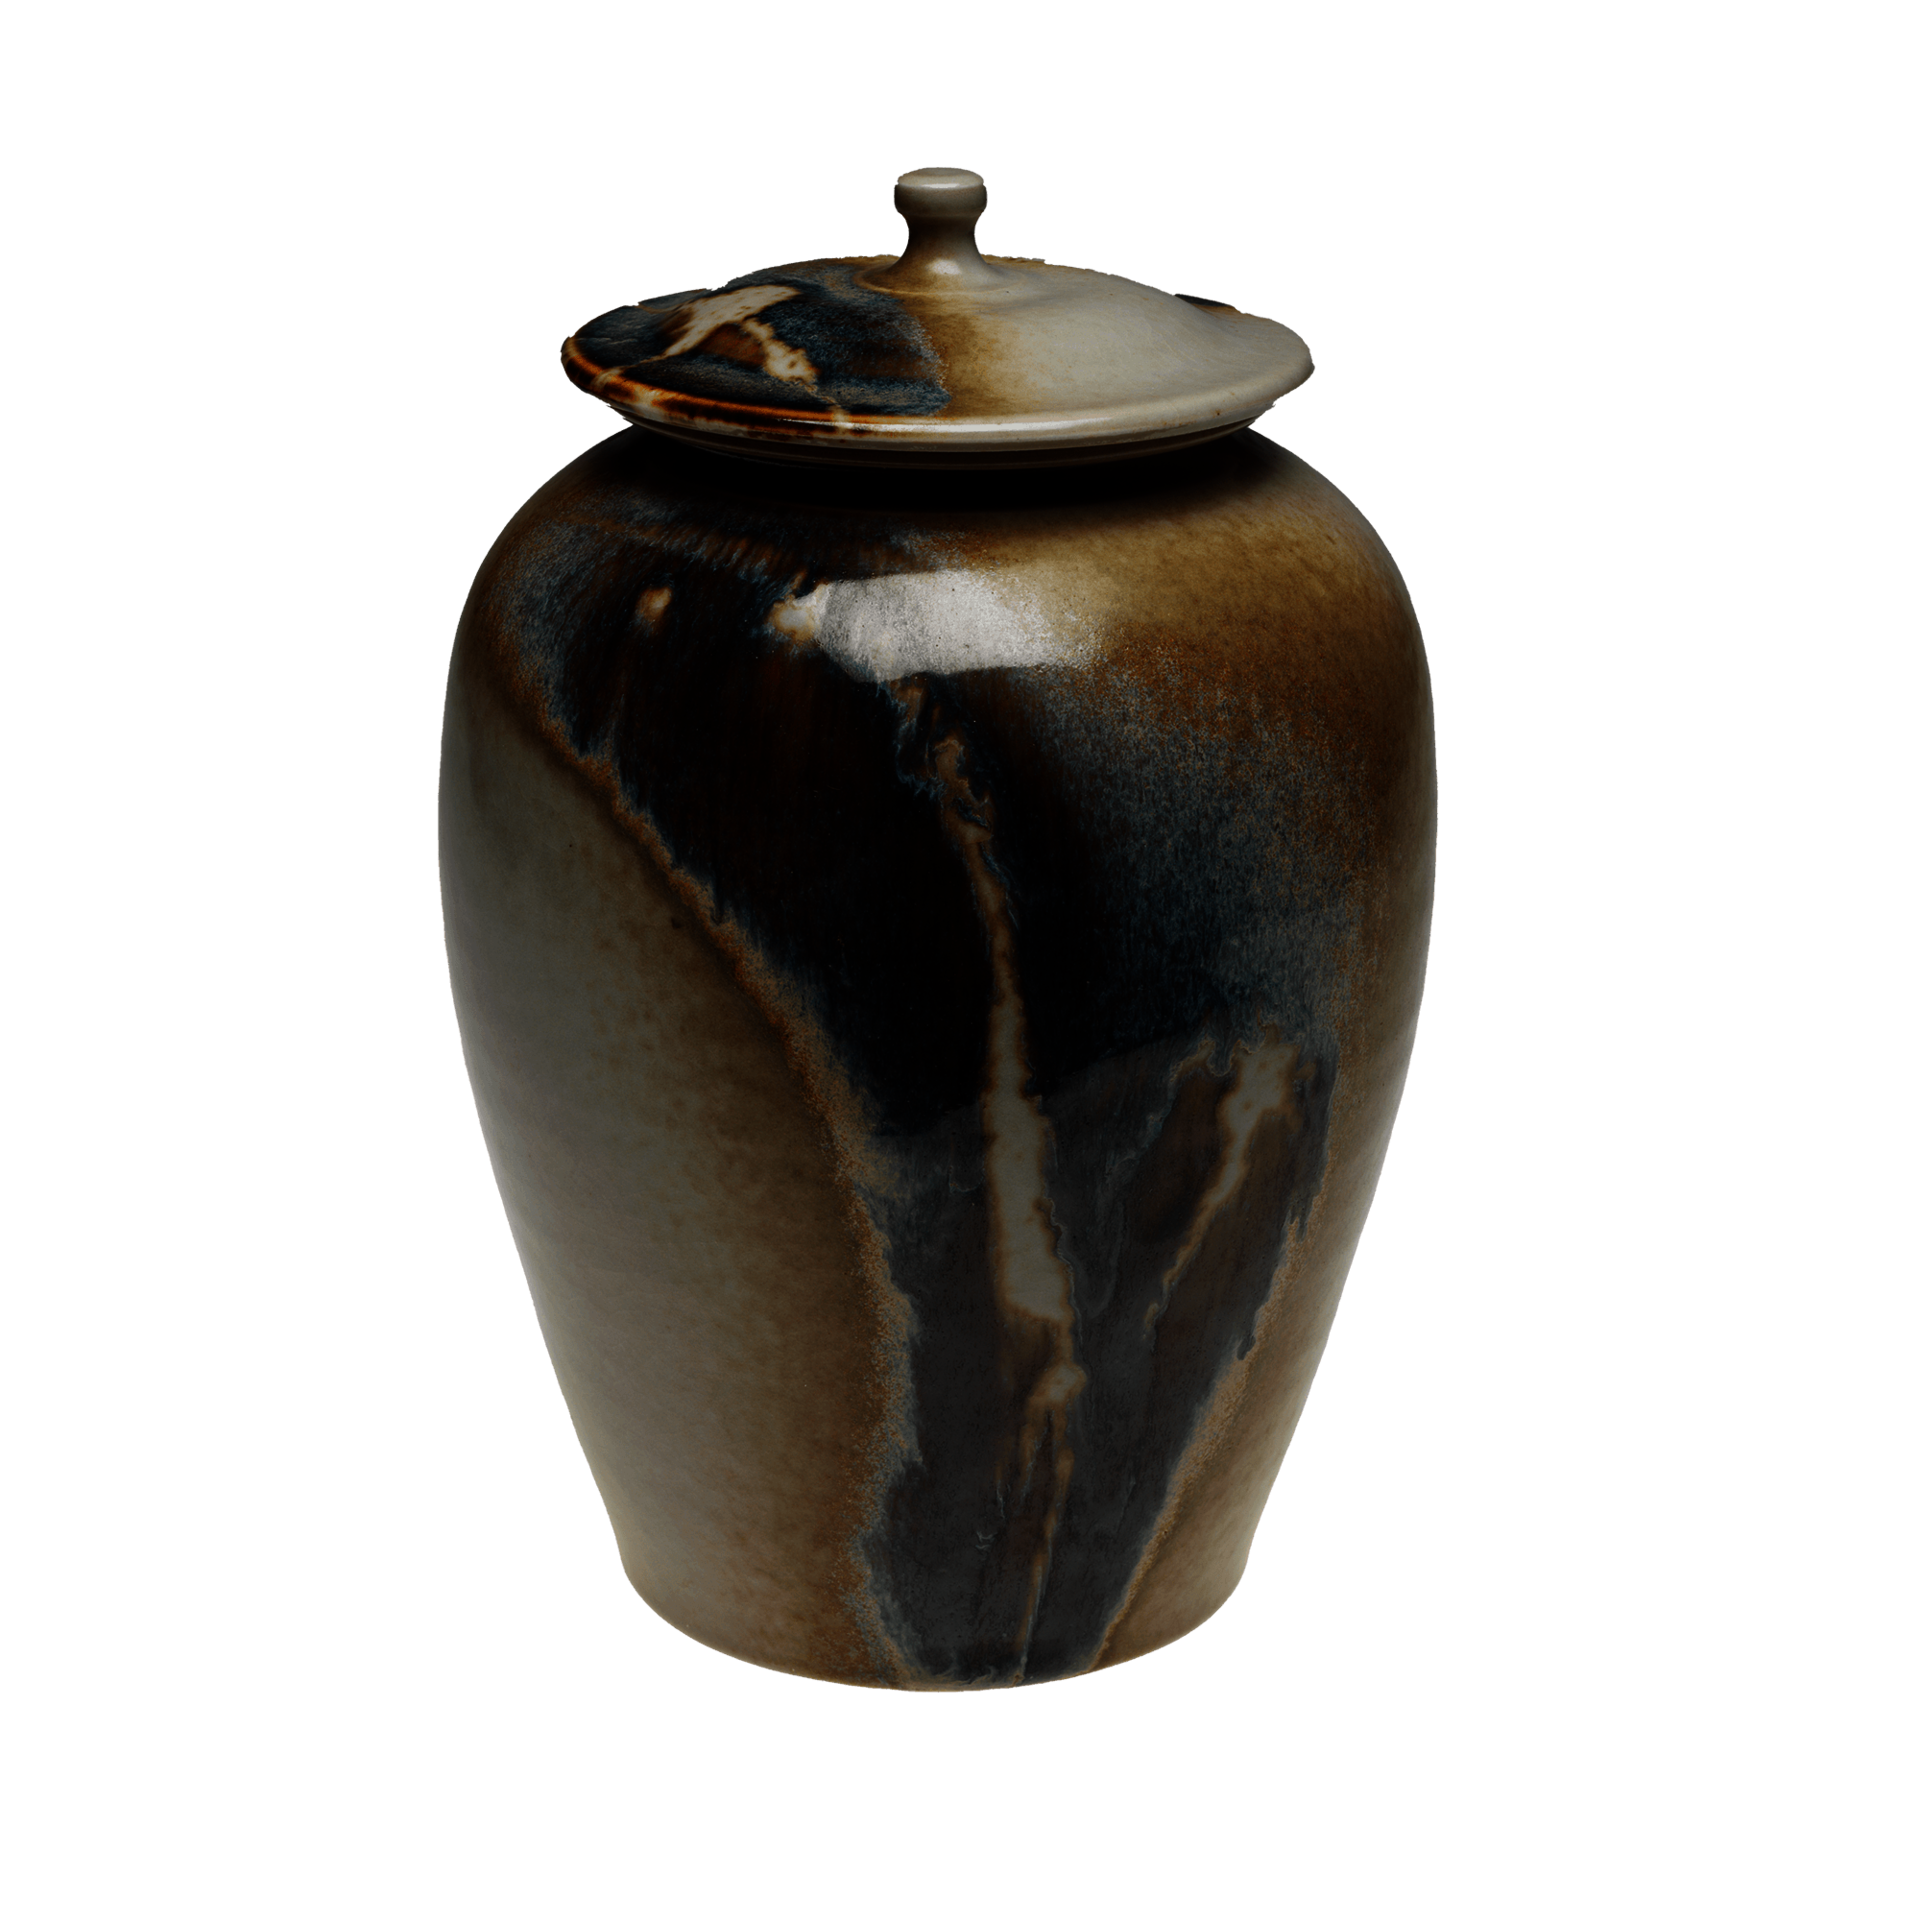 Porcelain jar featuring brown and dark blue streaked glaze and a lid with a small finial